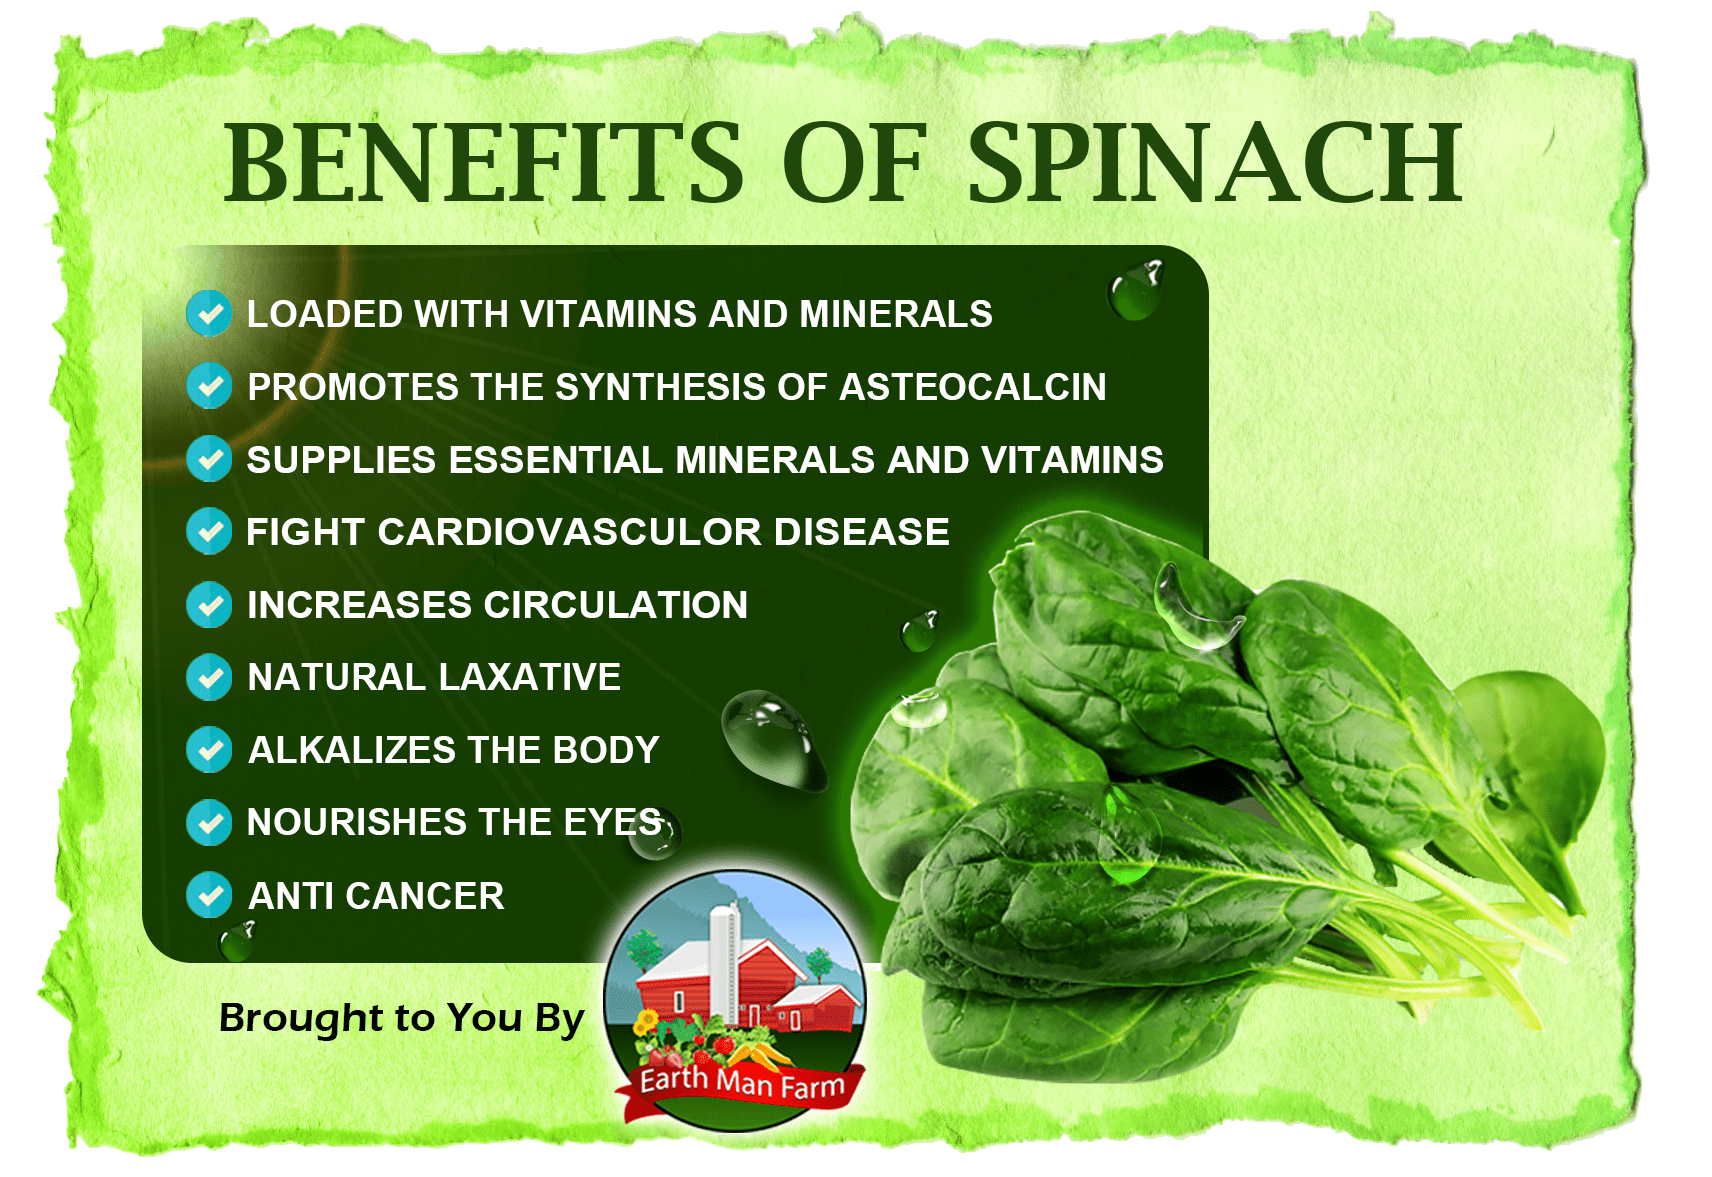 Spinach: The Nutritional Powerhouse Taking the World by Storm